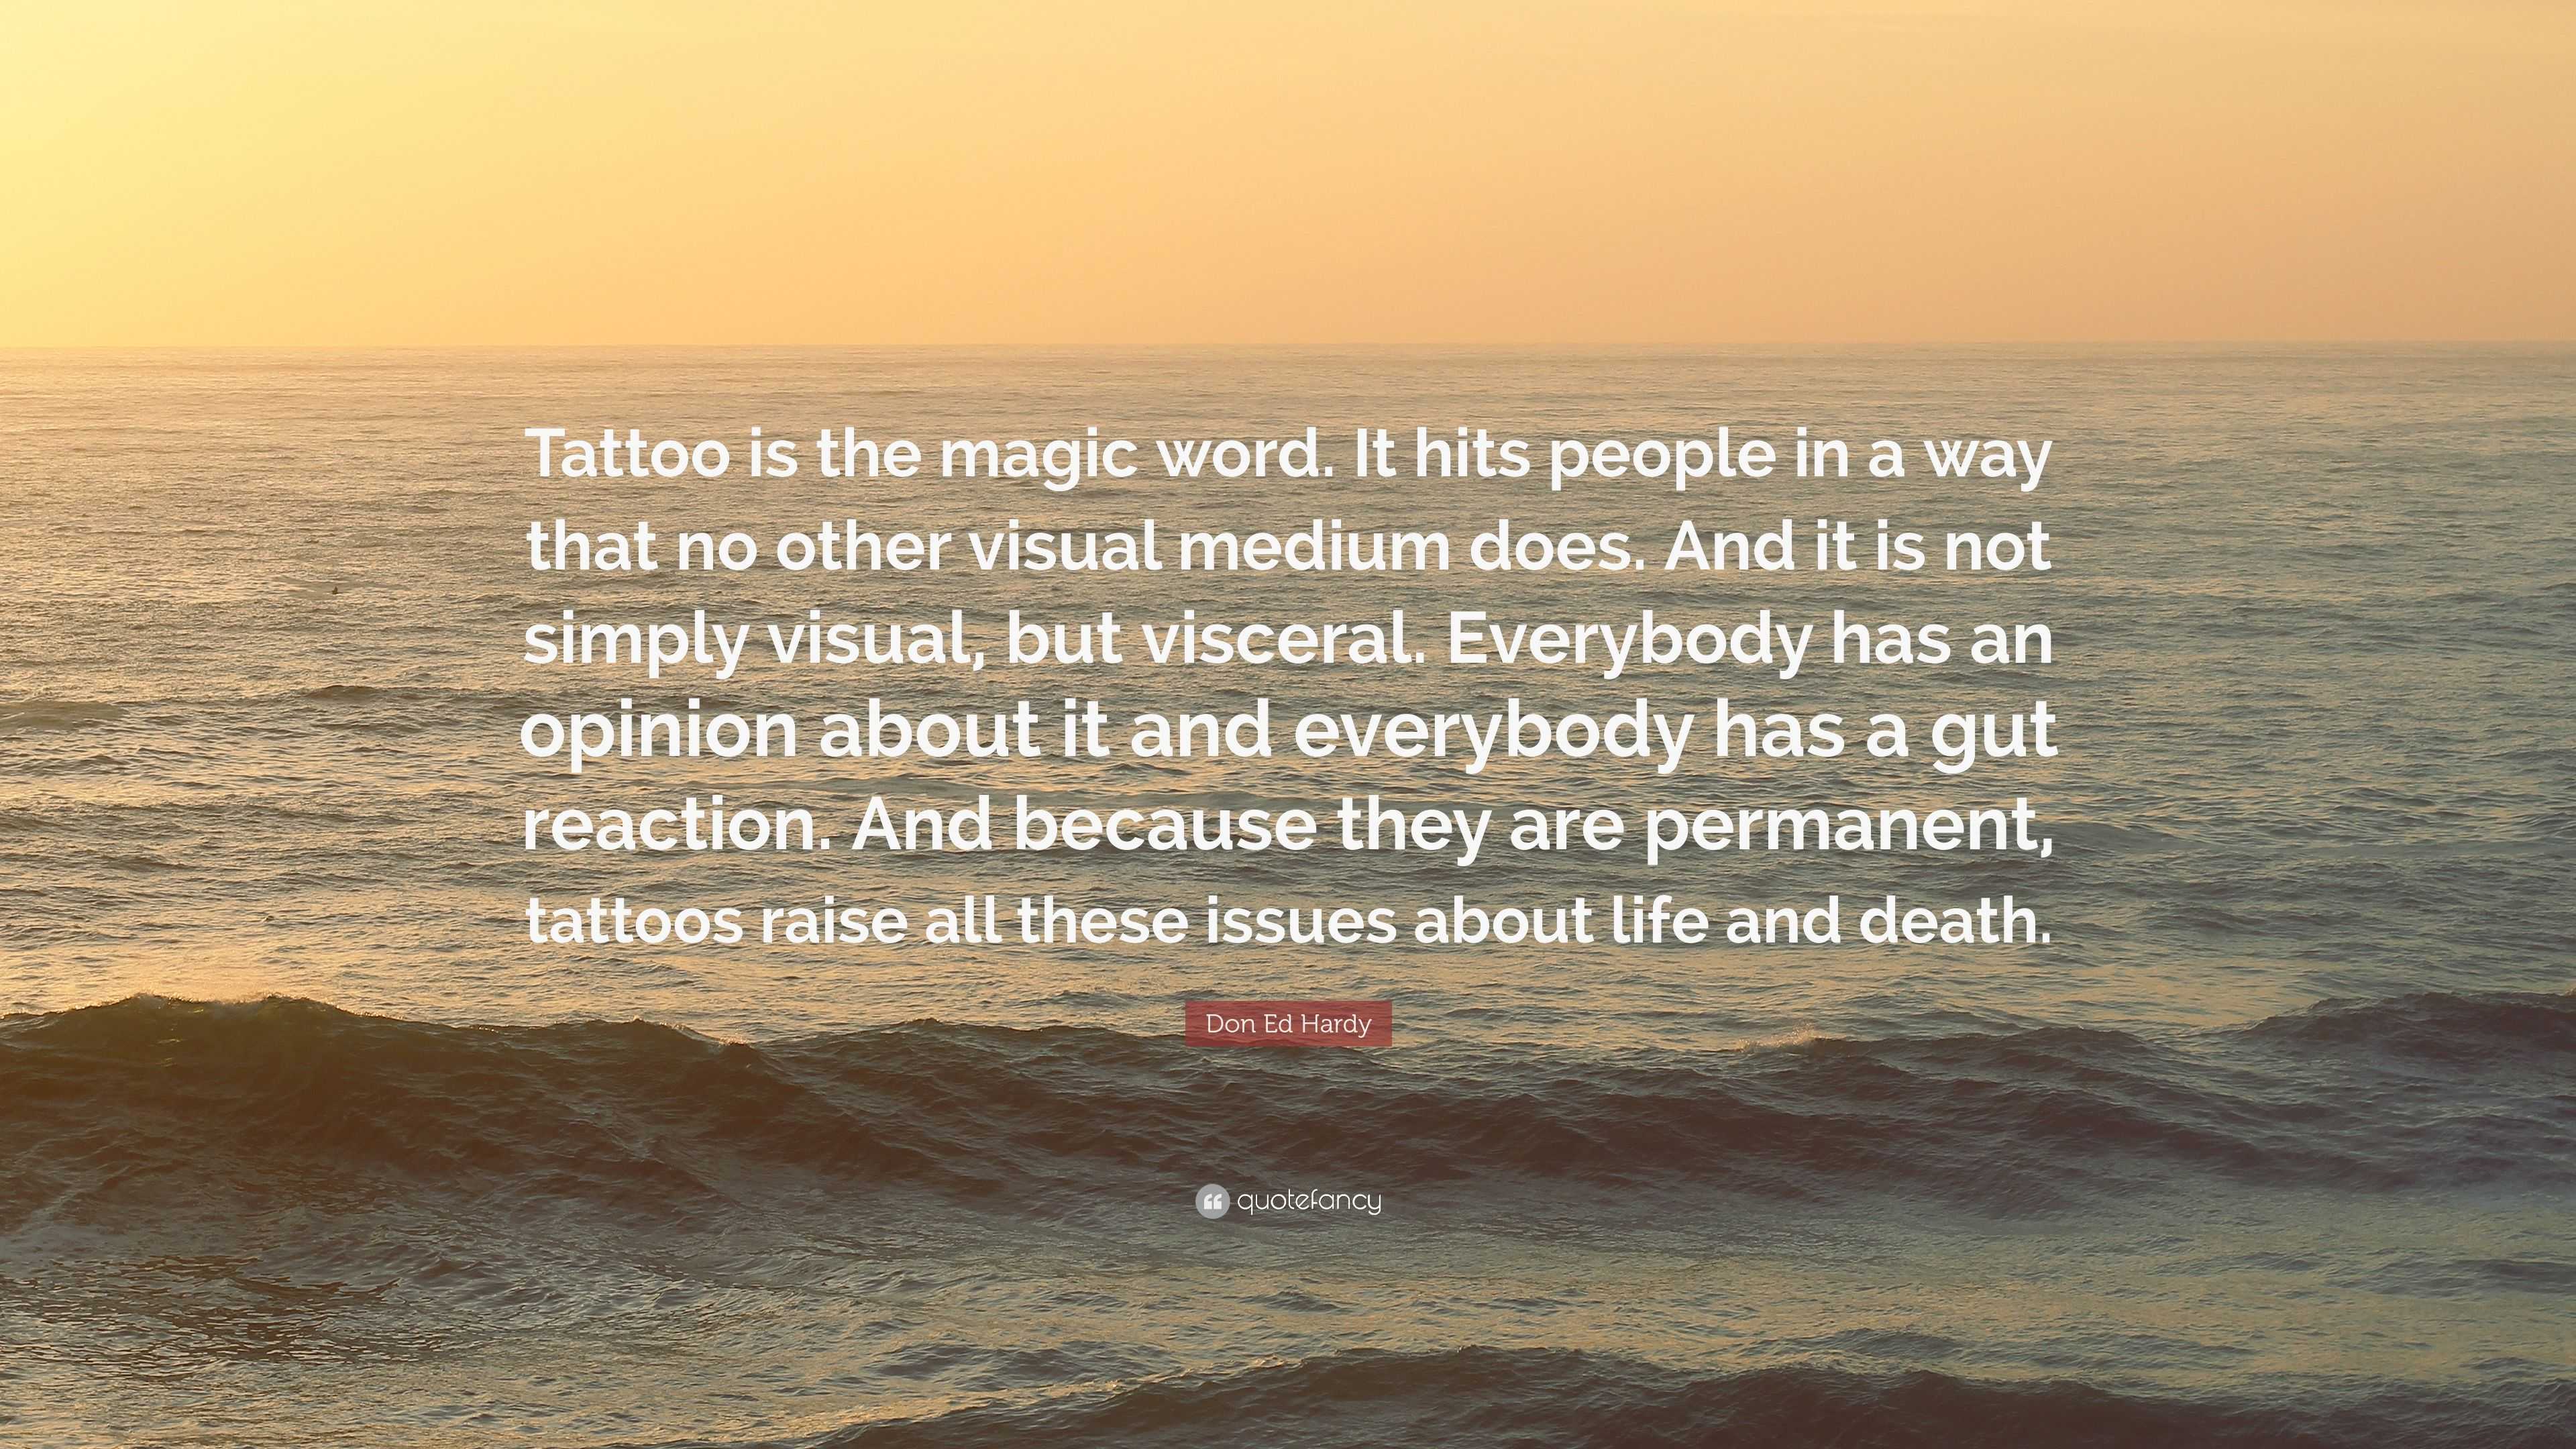 30+ Travel Quote Tattoos That Will Make You Want to Plan a Trip ASAP | Tattoo  quotes, Travel tattoo, Wanderlust tattoo